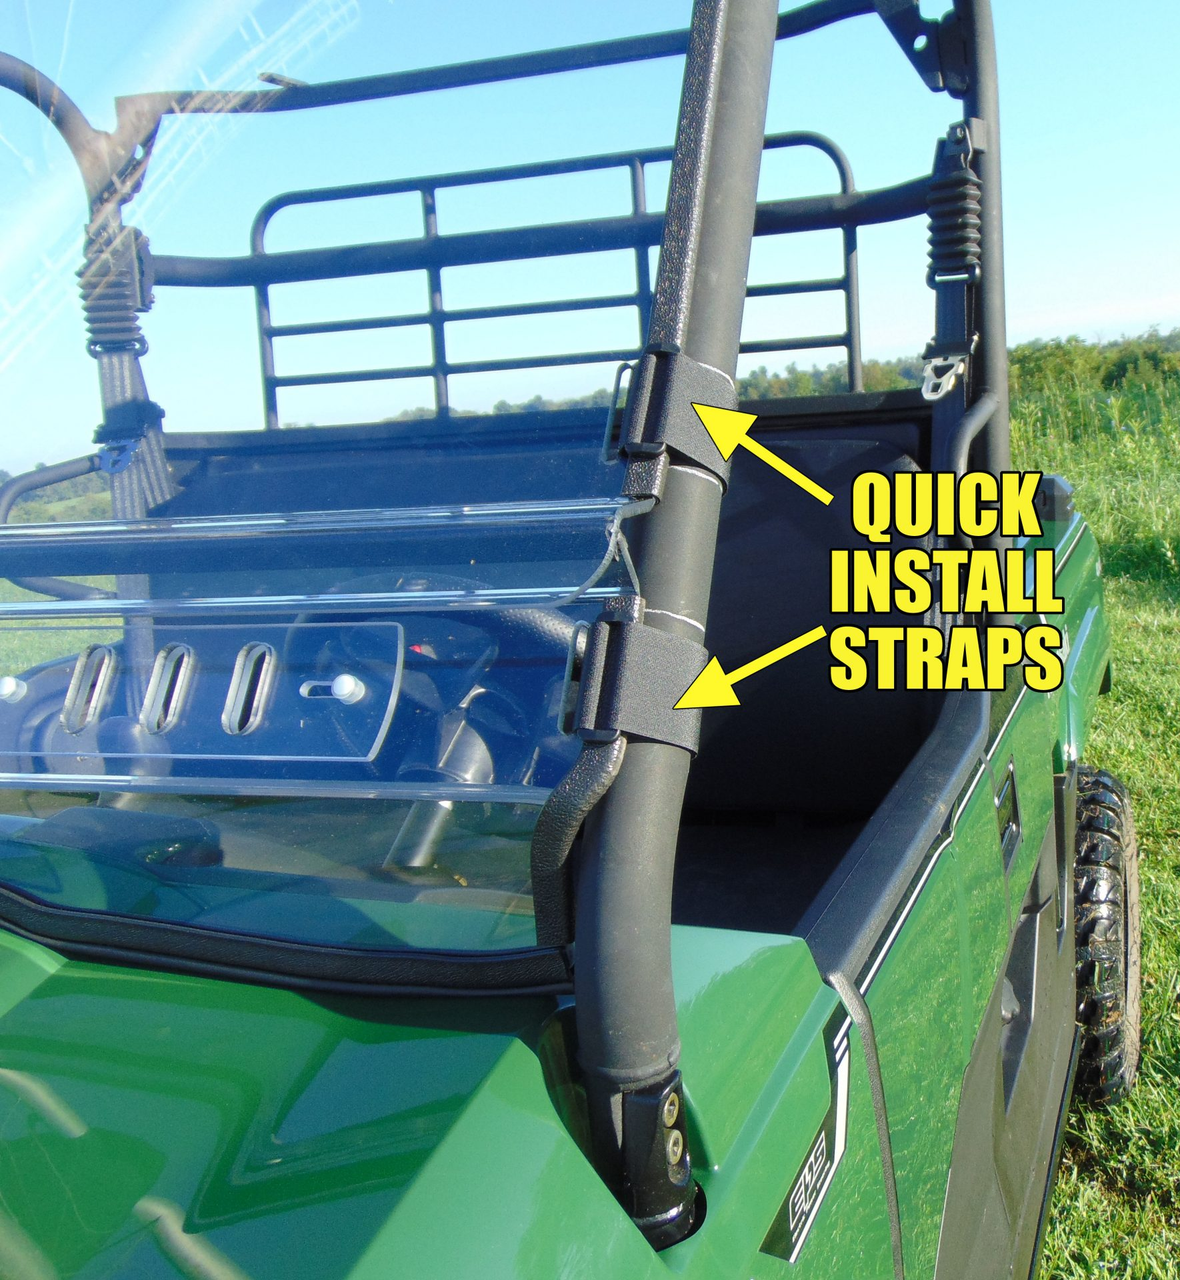 3 Star side x side CF Moto Z-Force windshield quick install straps